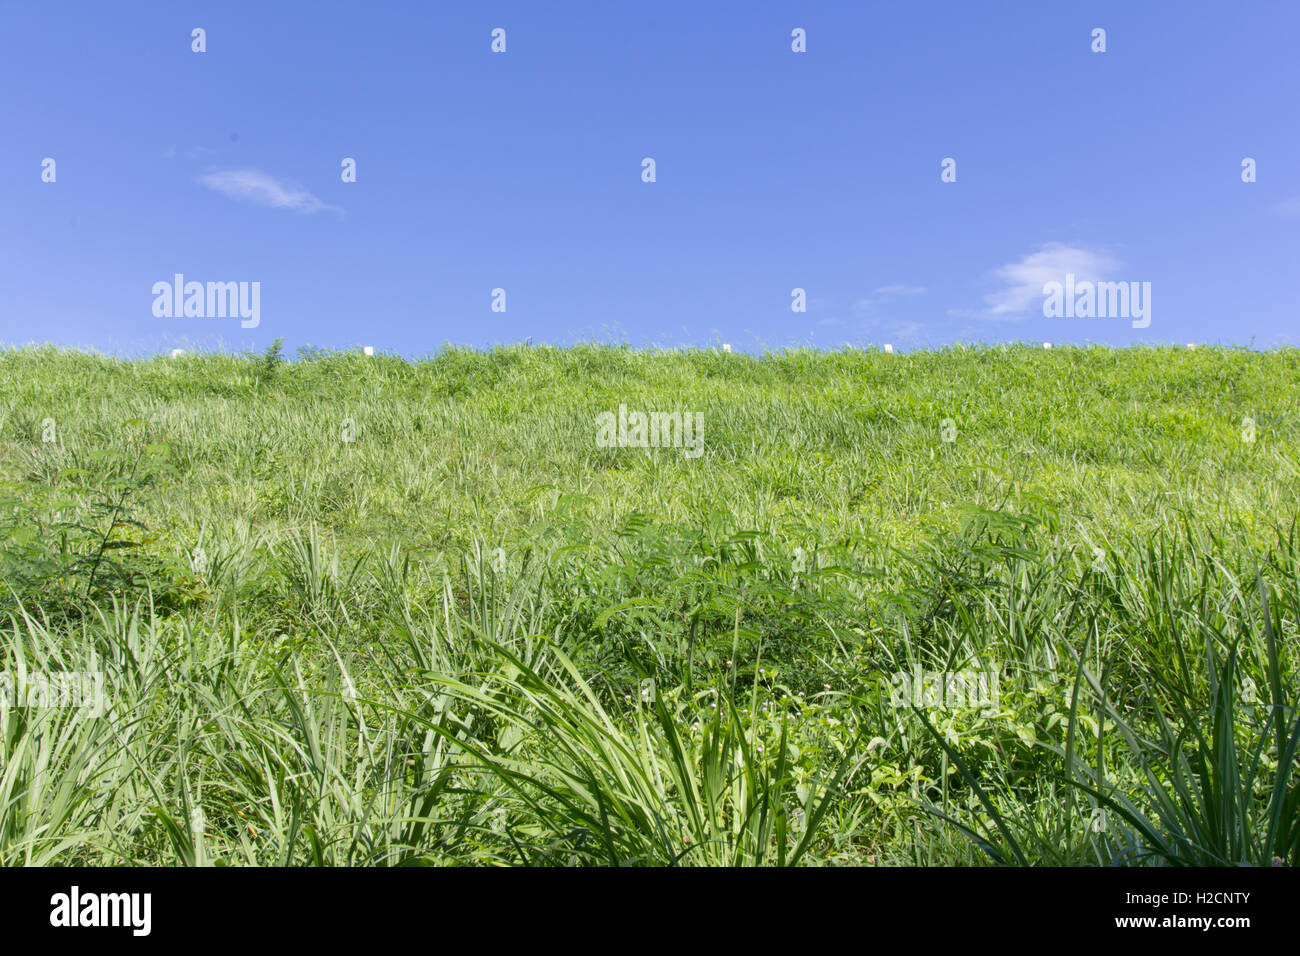 Green field with blue sky Banque D'Images